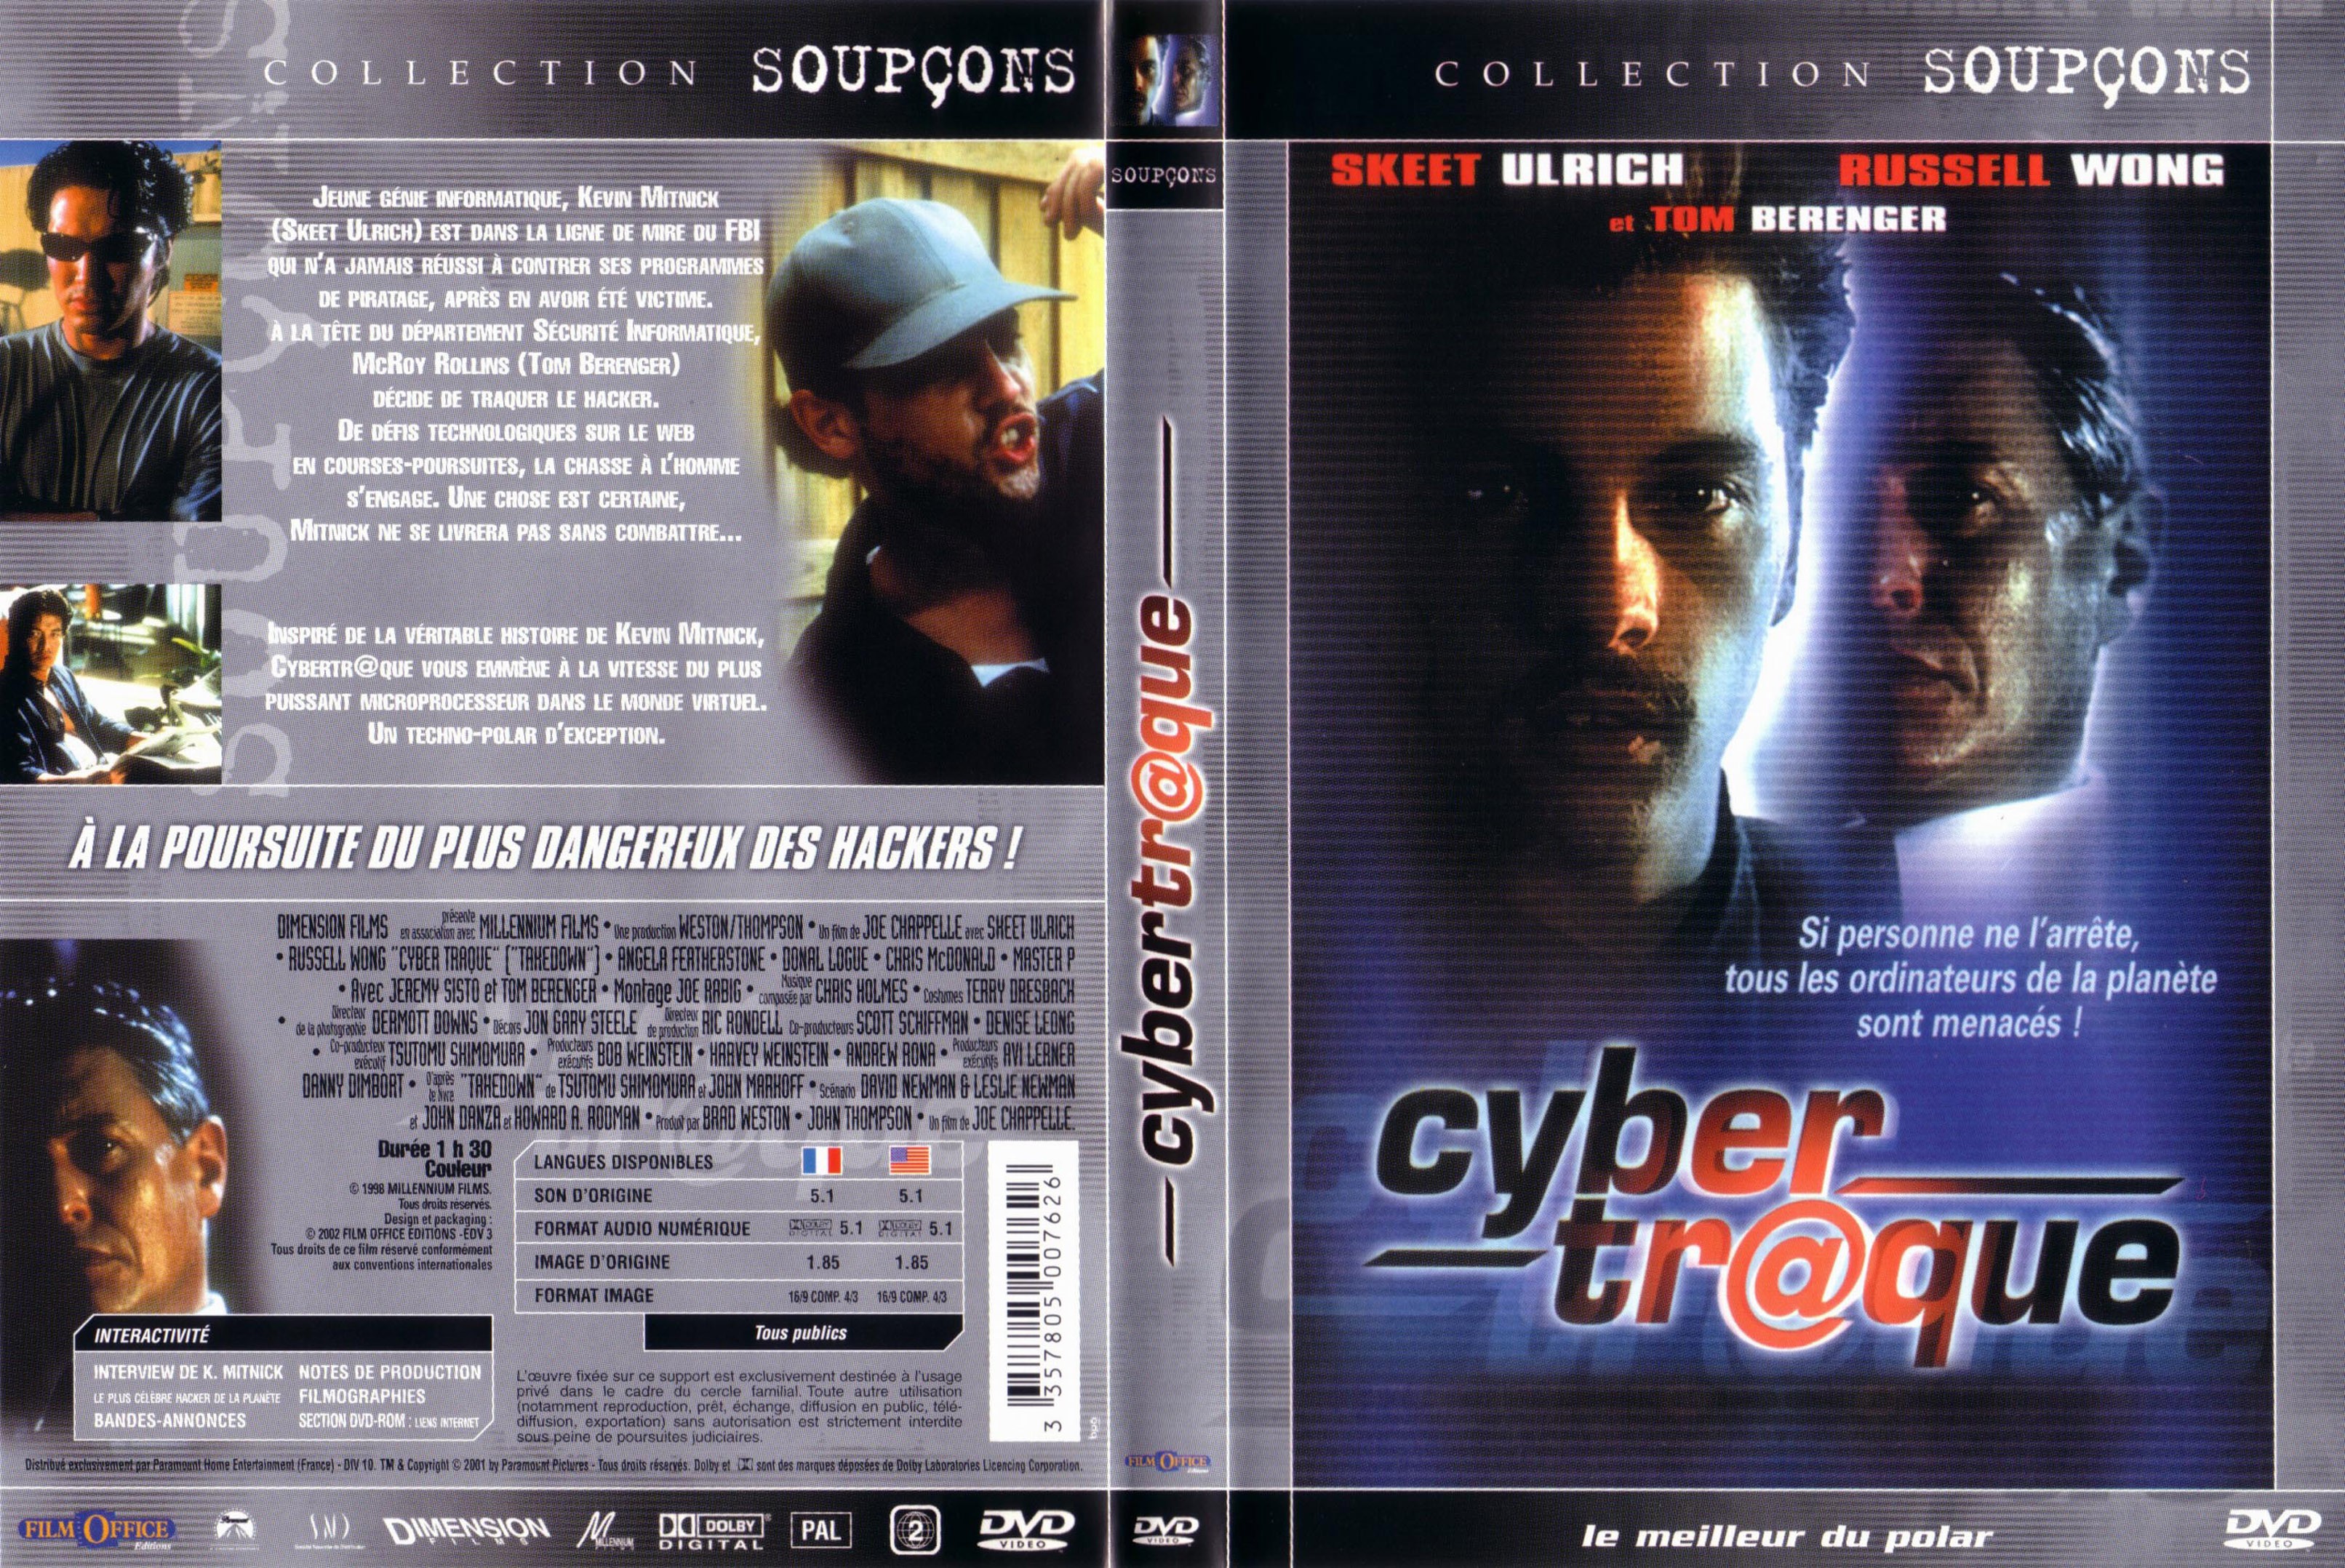 Jaquette DVD Cyber traque